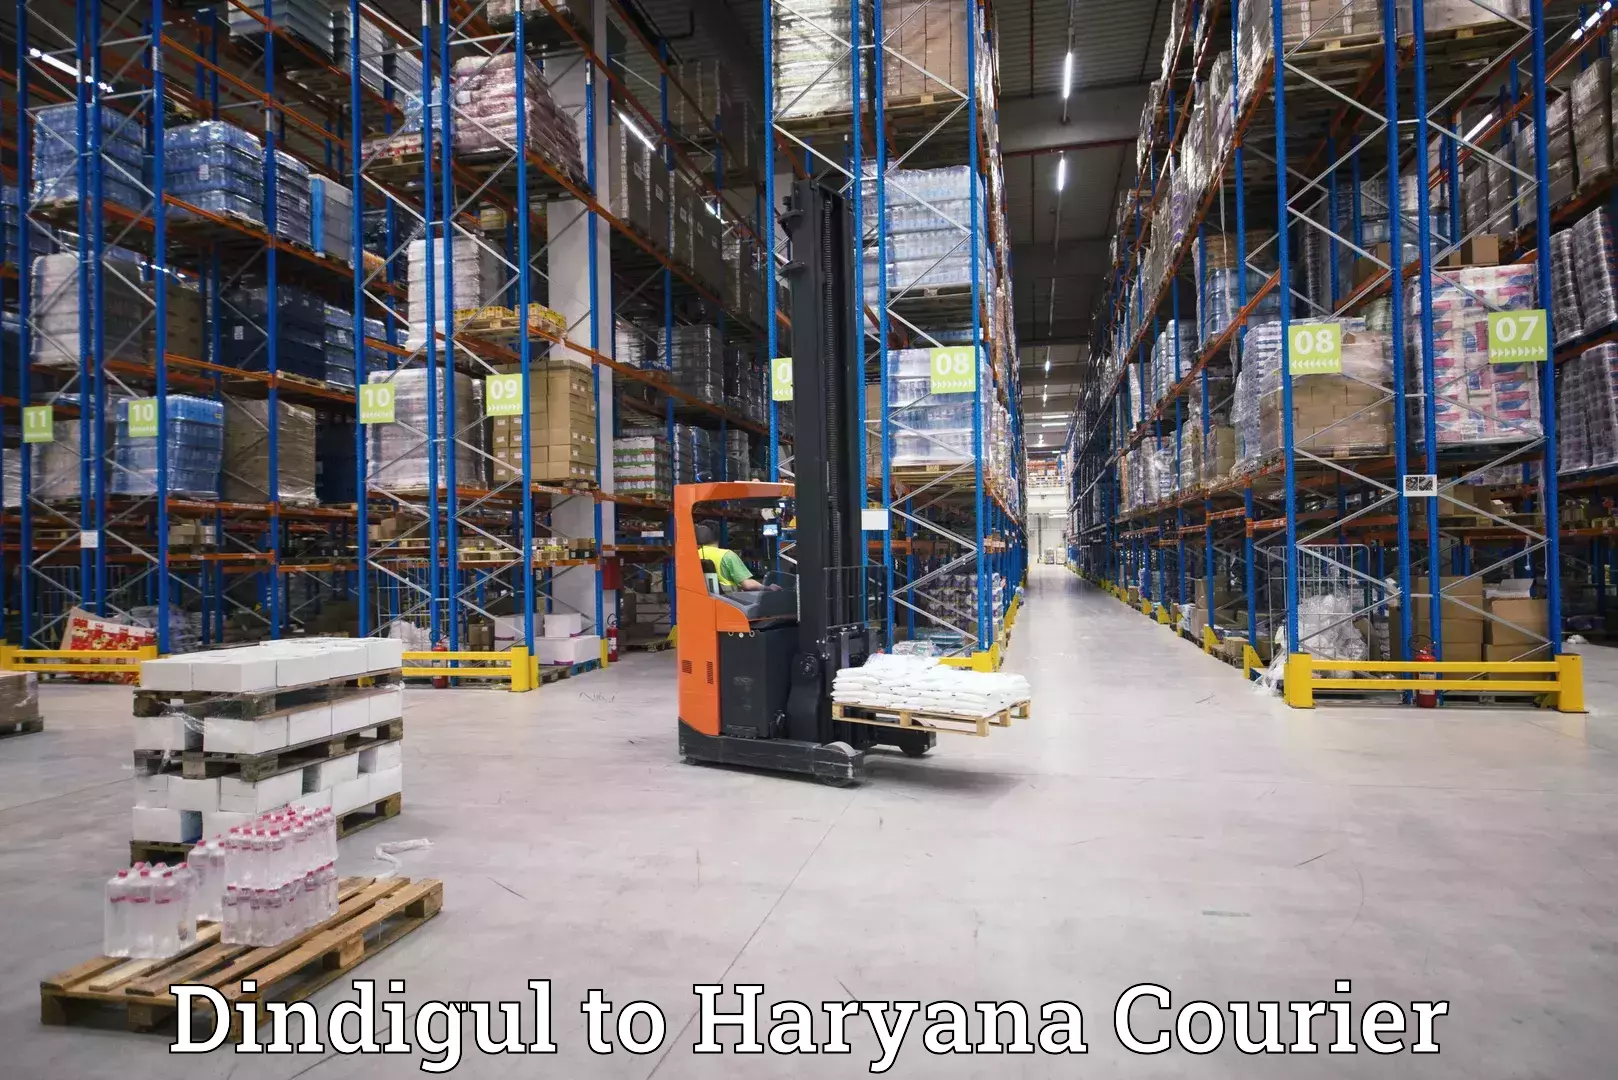 State-of-the-art courier technology Dindigul to Gurgaon